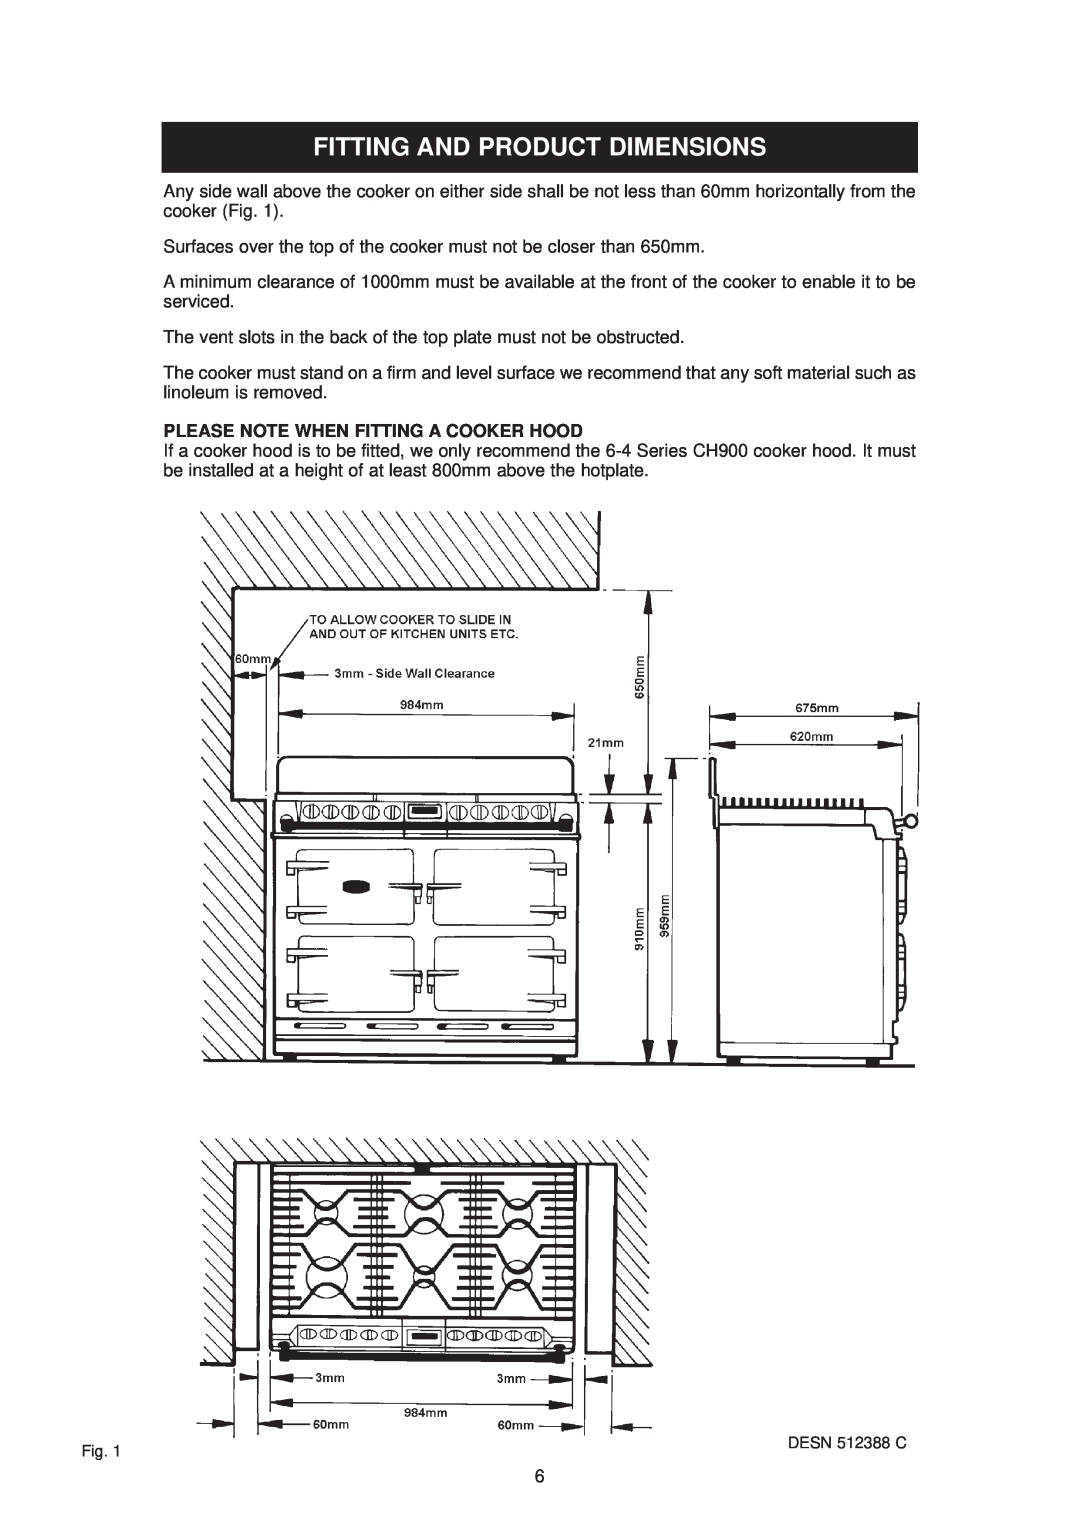 Aga Ranges dc6 owner manual Fitting And Product Dimensions, Please Note When Fitting A Cooker Hood 